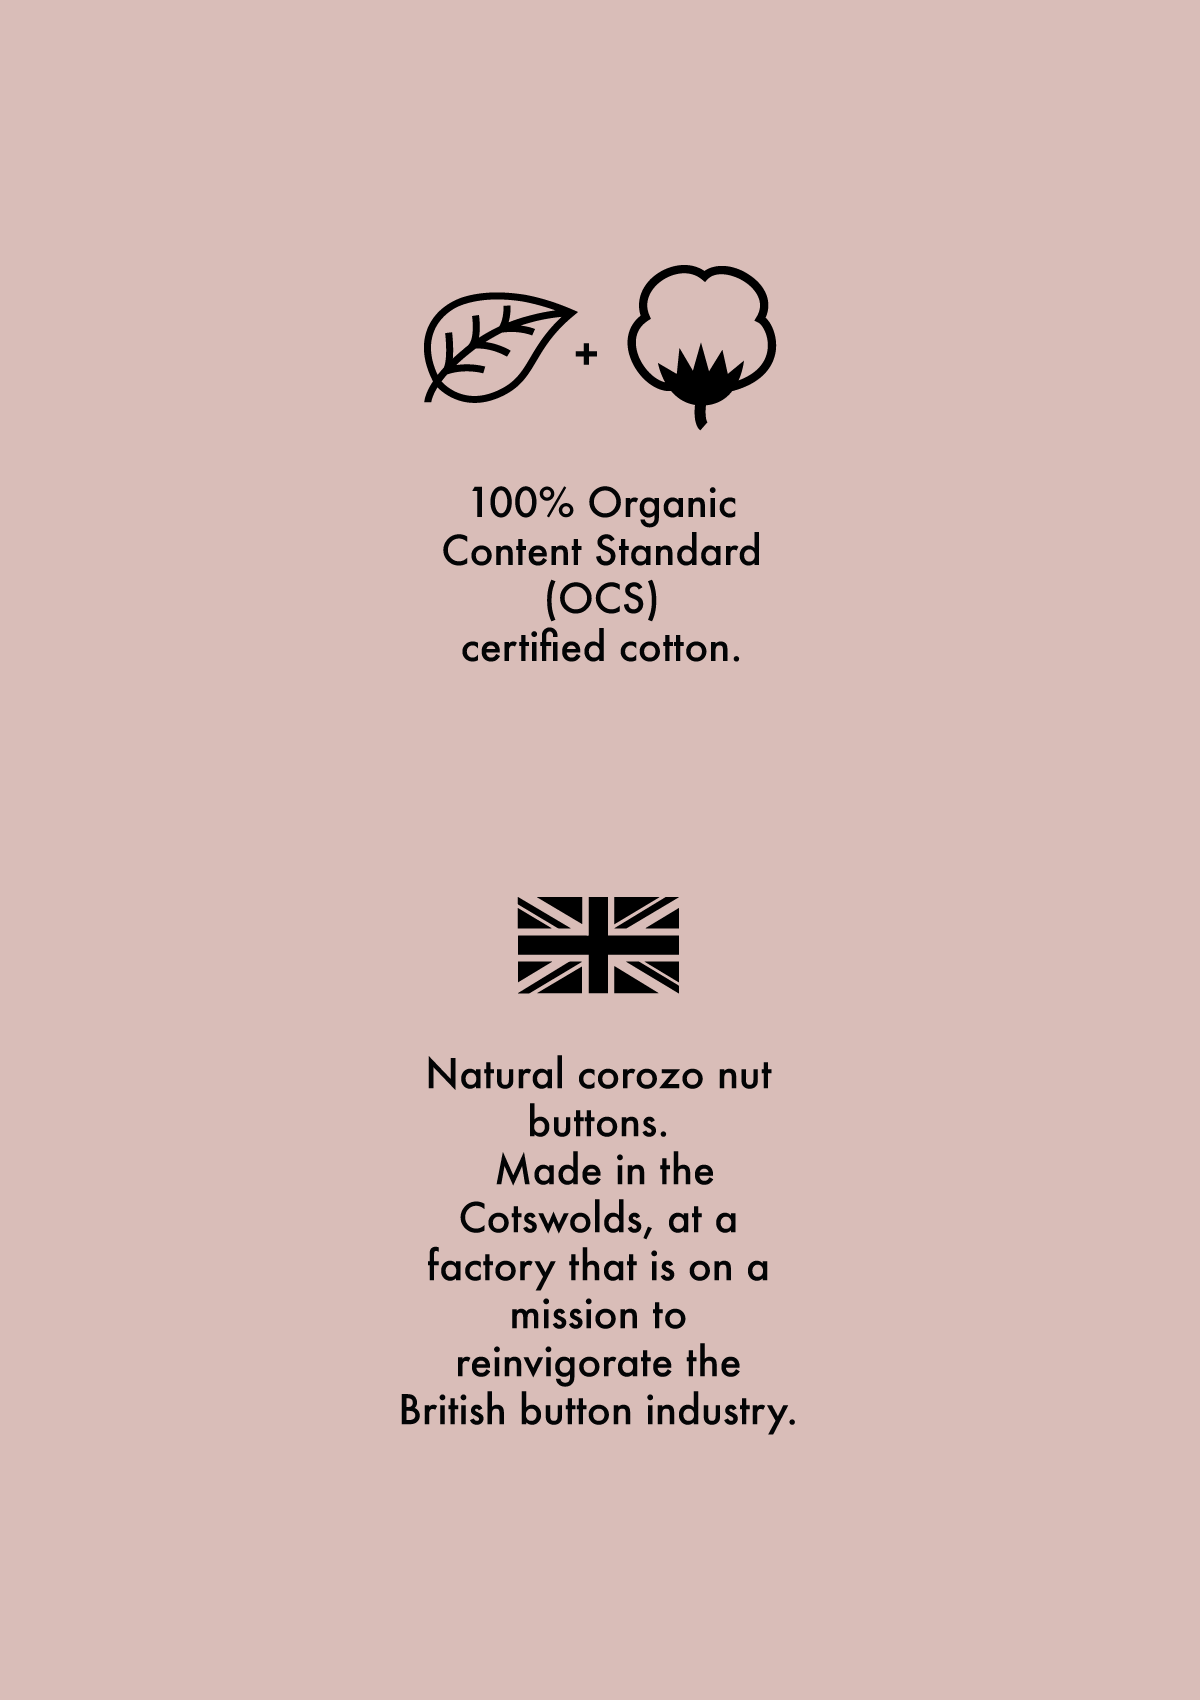 A Union Jack symbol to show the fabric is woven in the North West of England that has been making corduroy since the 1800s. A leaf and cotton plant symbol to explain that the fabric is 100% Global Organic Standard certified organic cotton. 